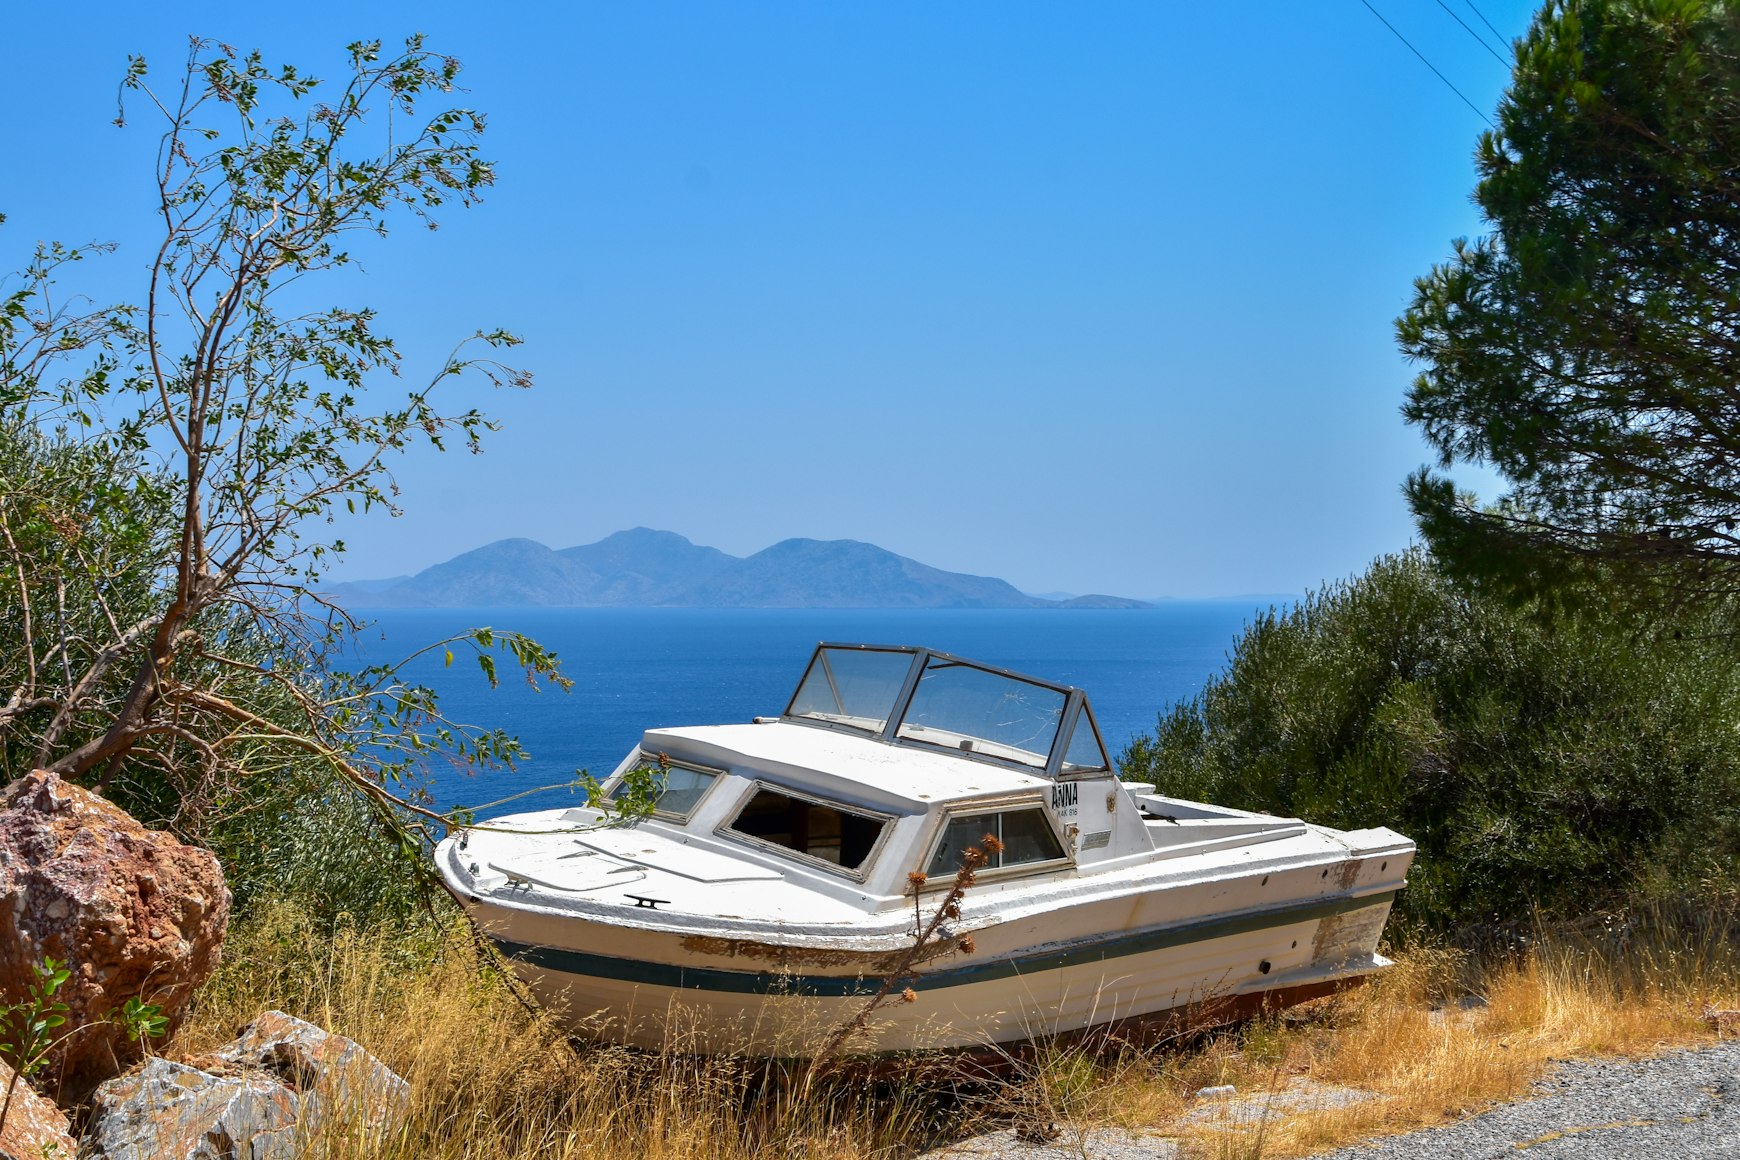 Abandoned boat on a mountain with view of the sea and islands in the distance.